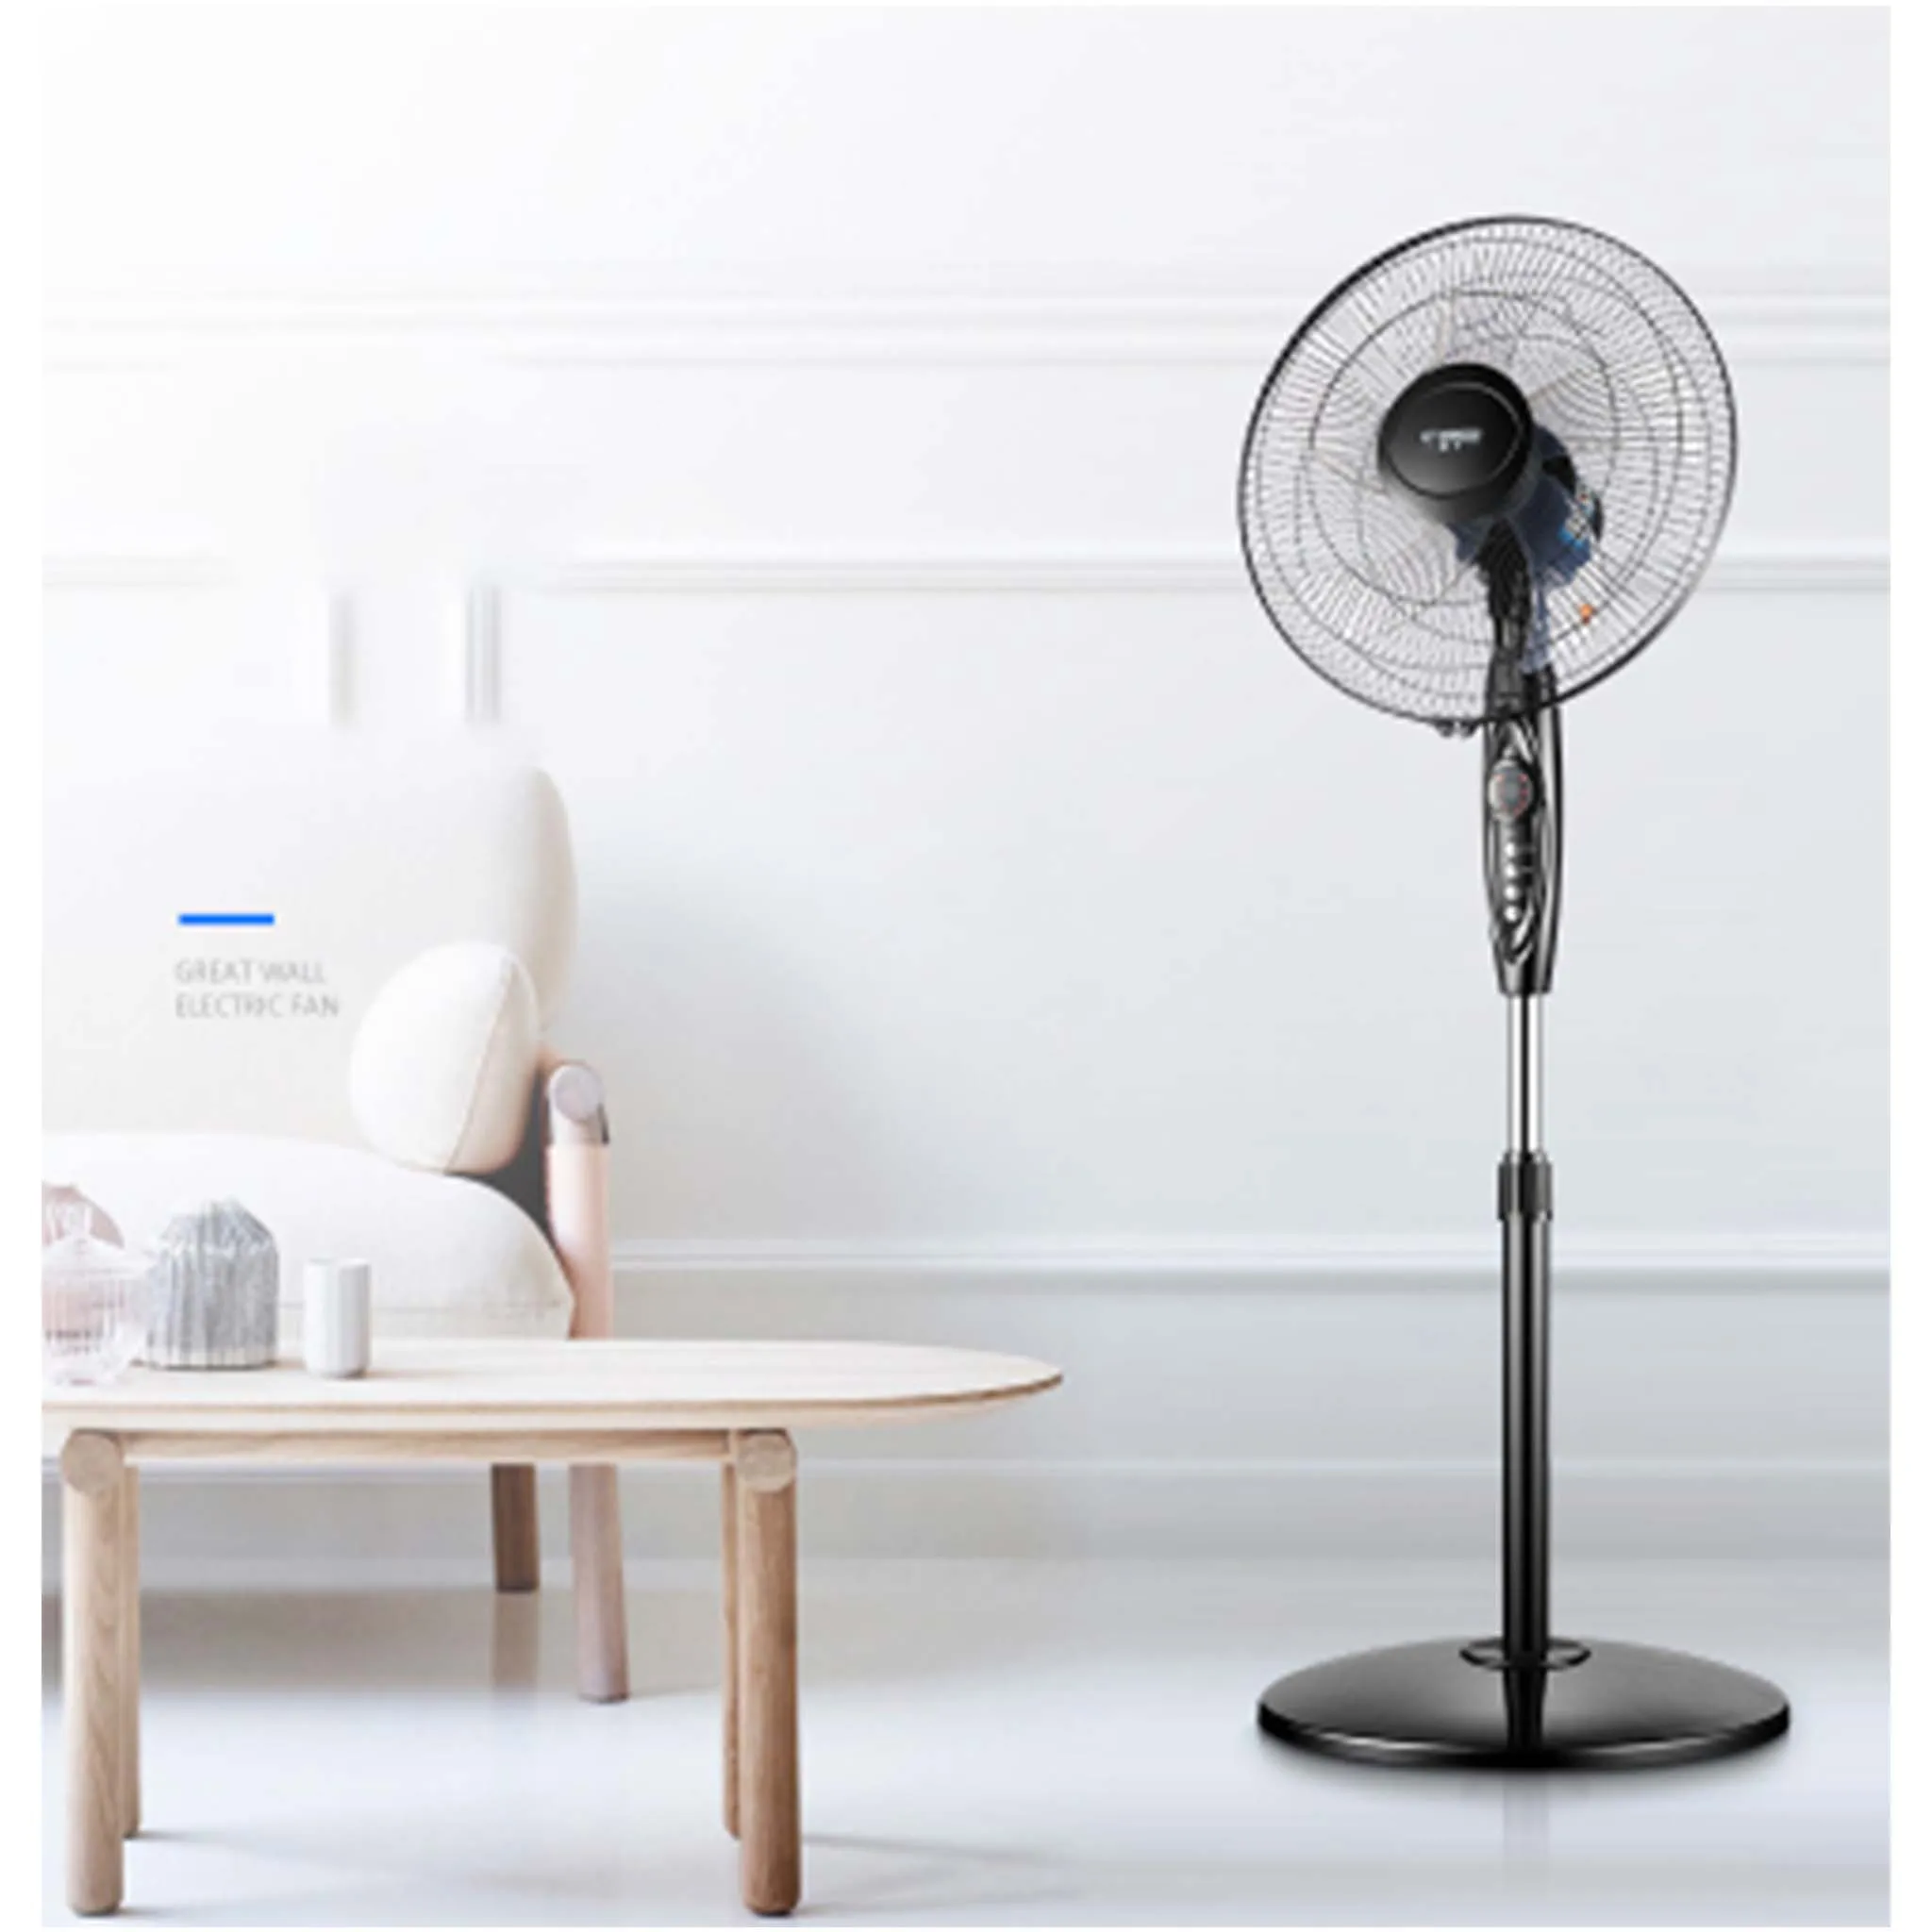 
2021 New 16 Inch Three Speed Low Noise Stand Fan with Remote Control 